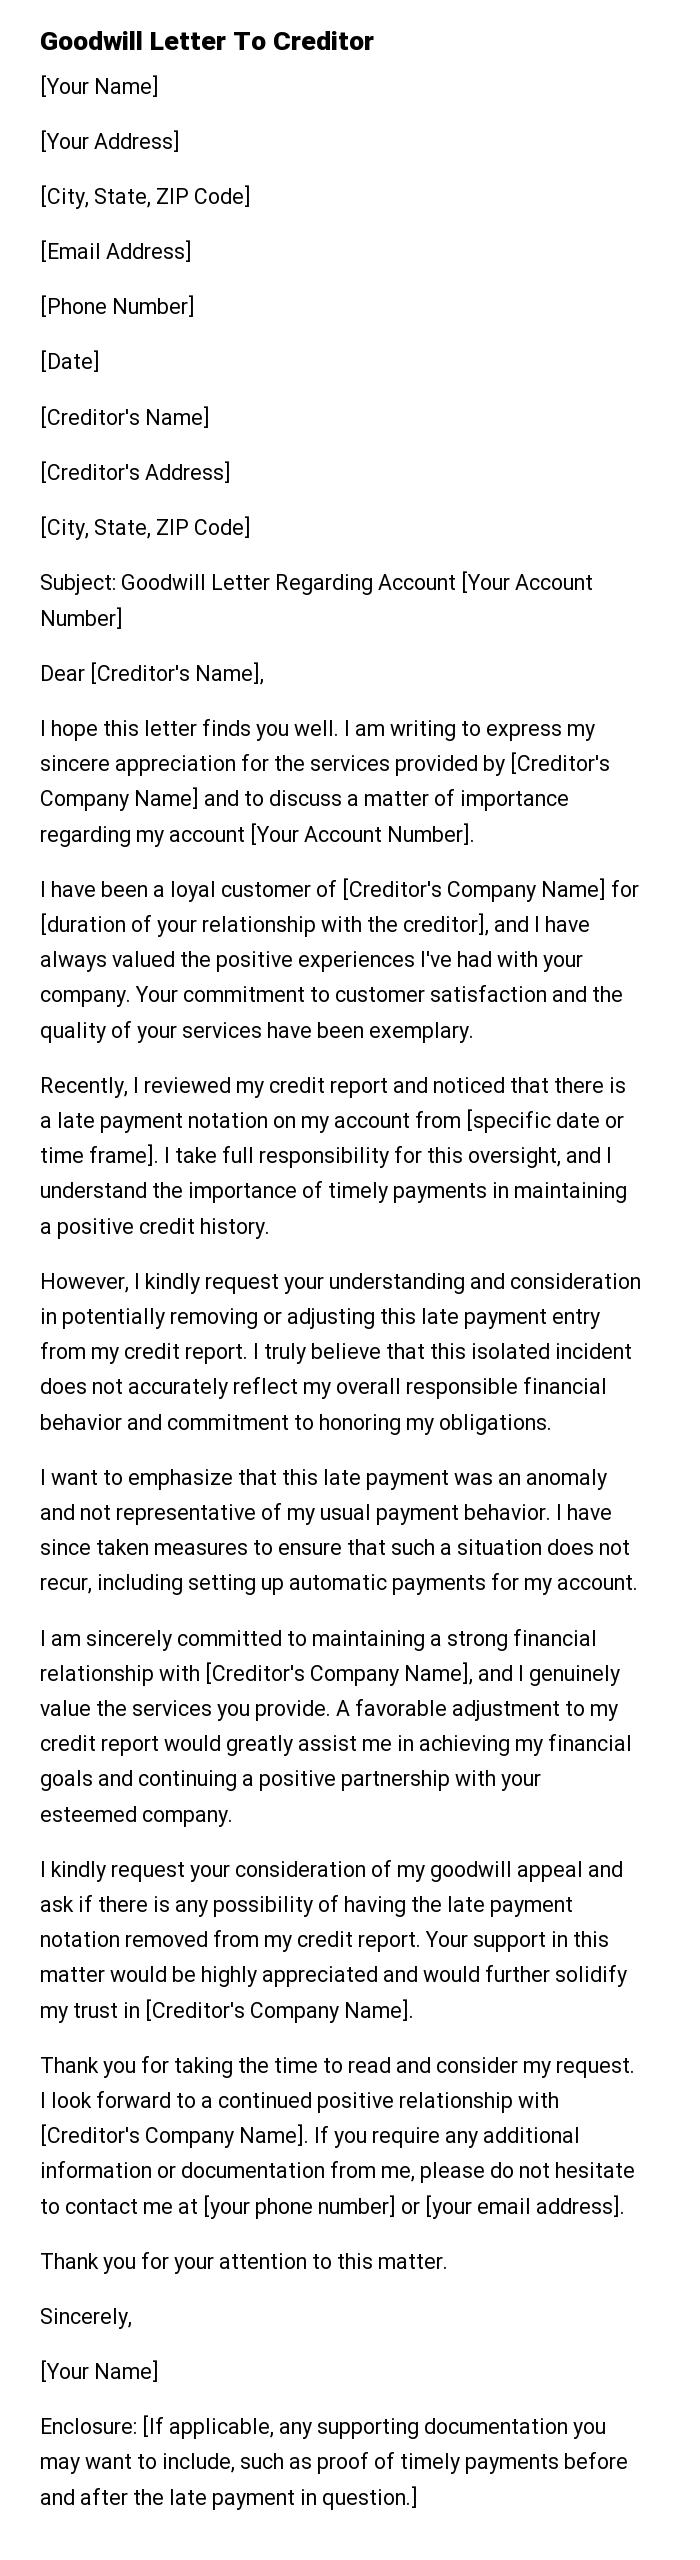 Goodwill Letter To Creditor